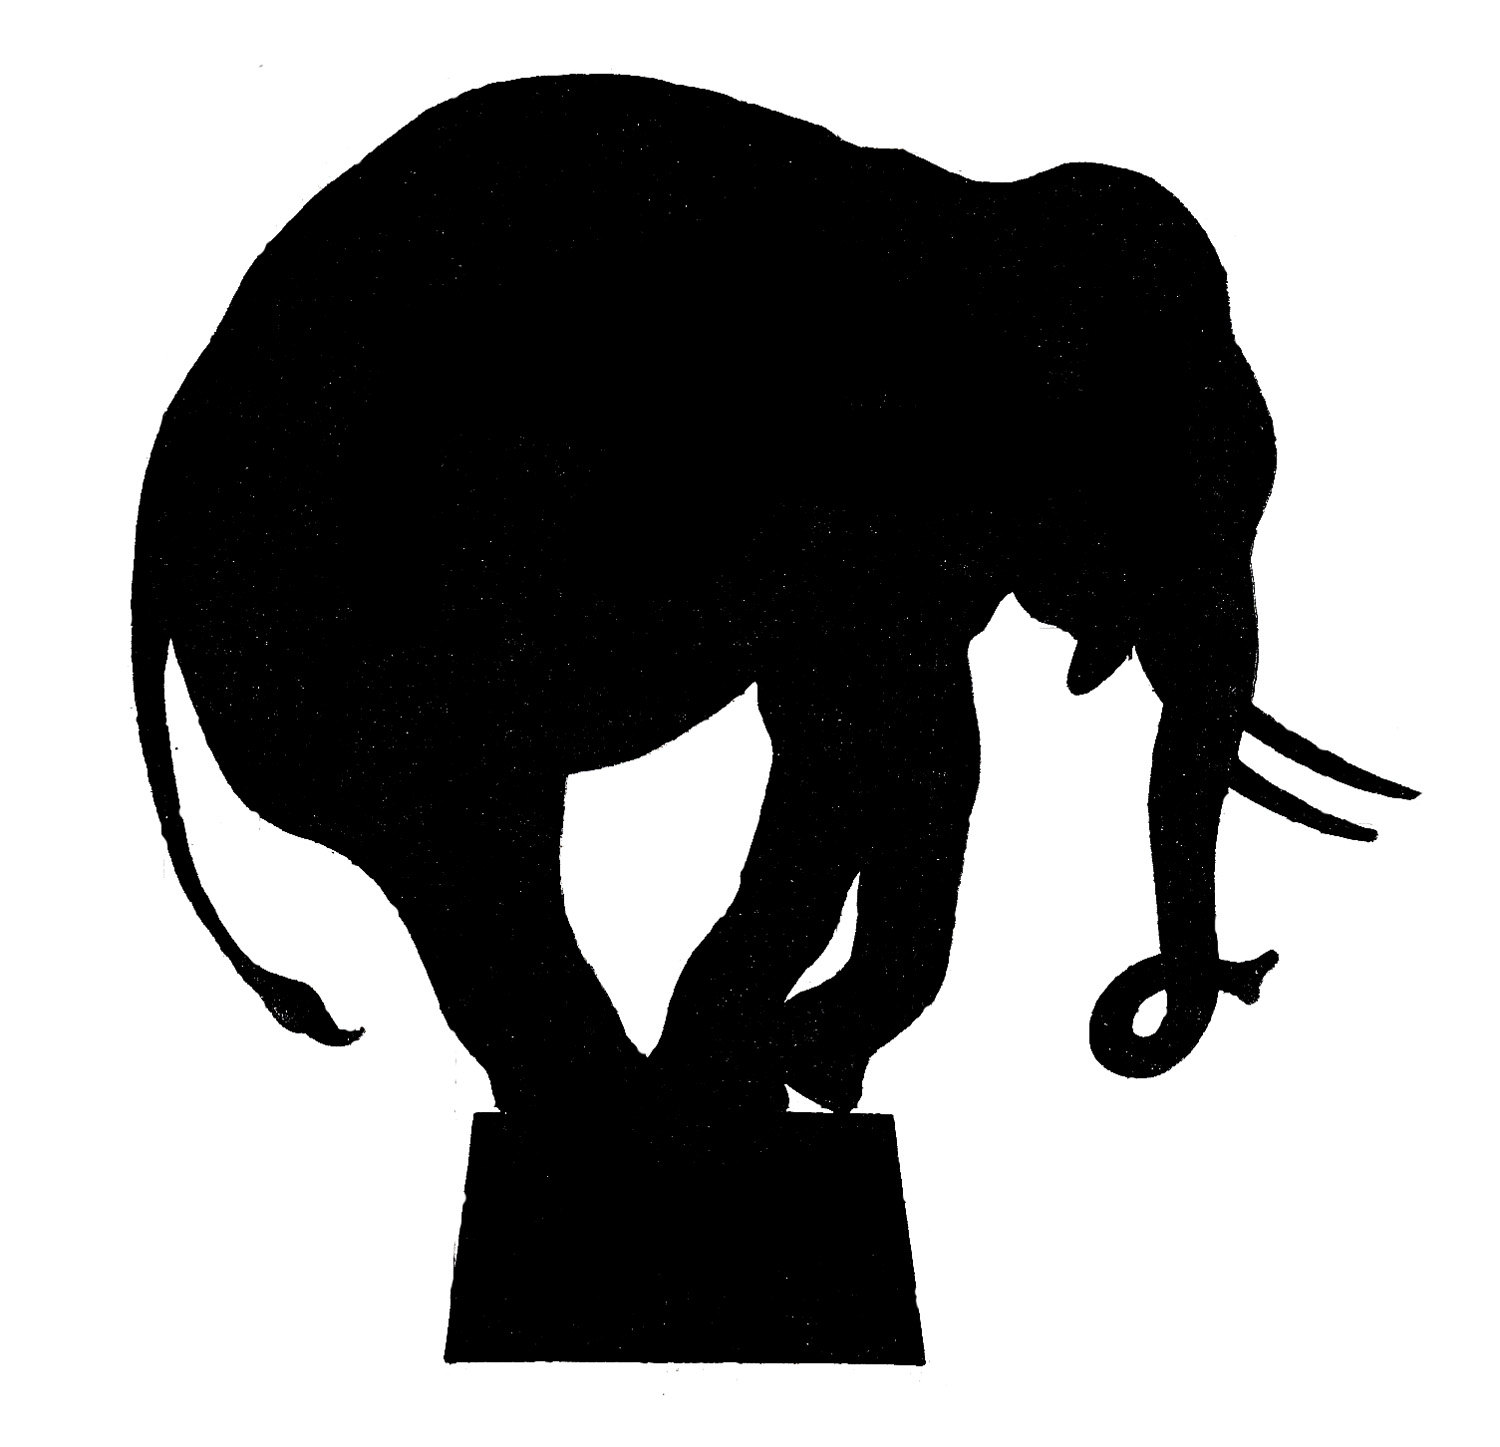 Image Downloads   Circus Elephant Silhouette   The Graphics Fairy